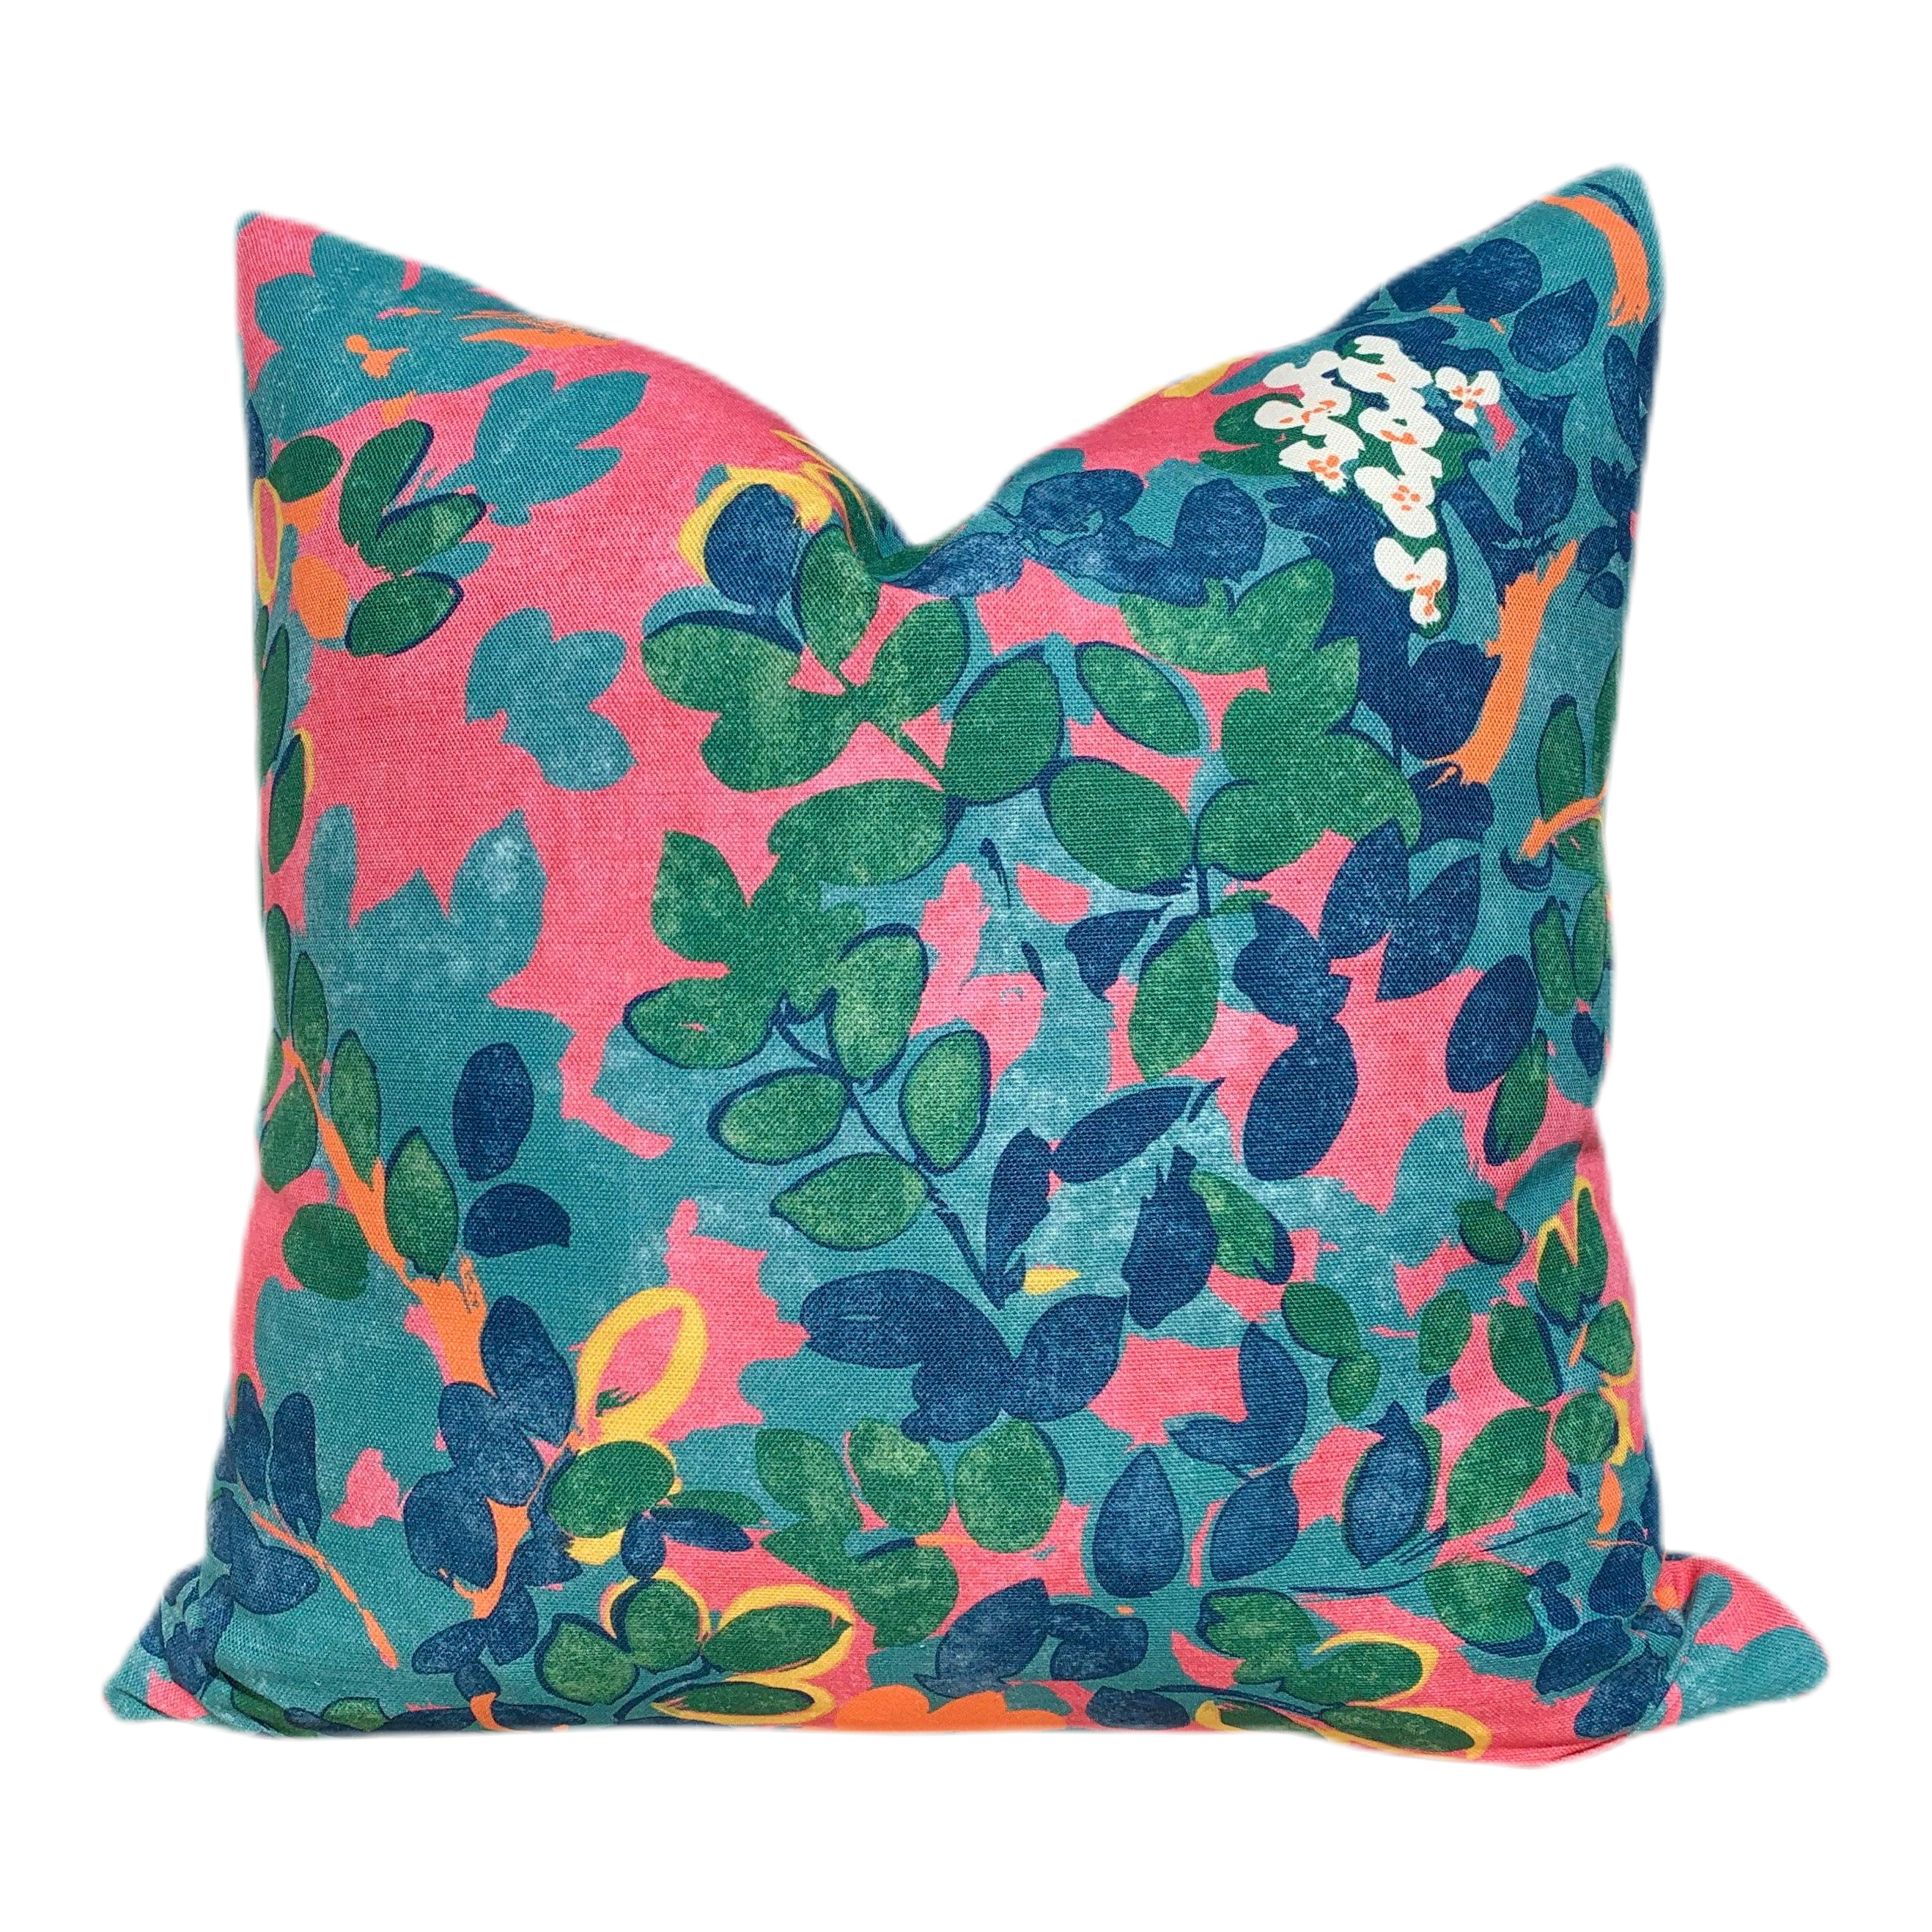 Central Park Floral Pillow Cover in Teal and Pink.